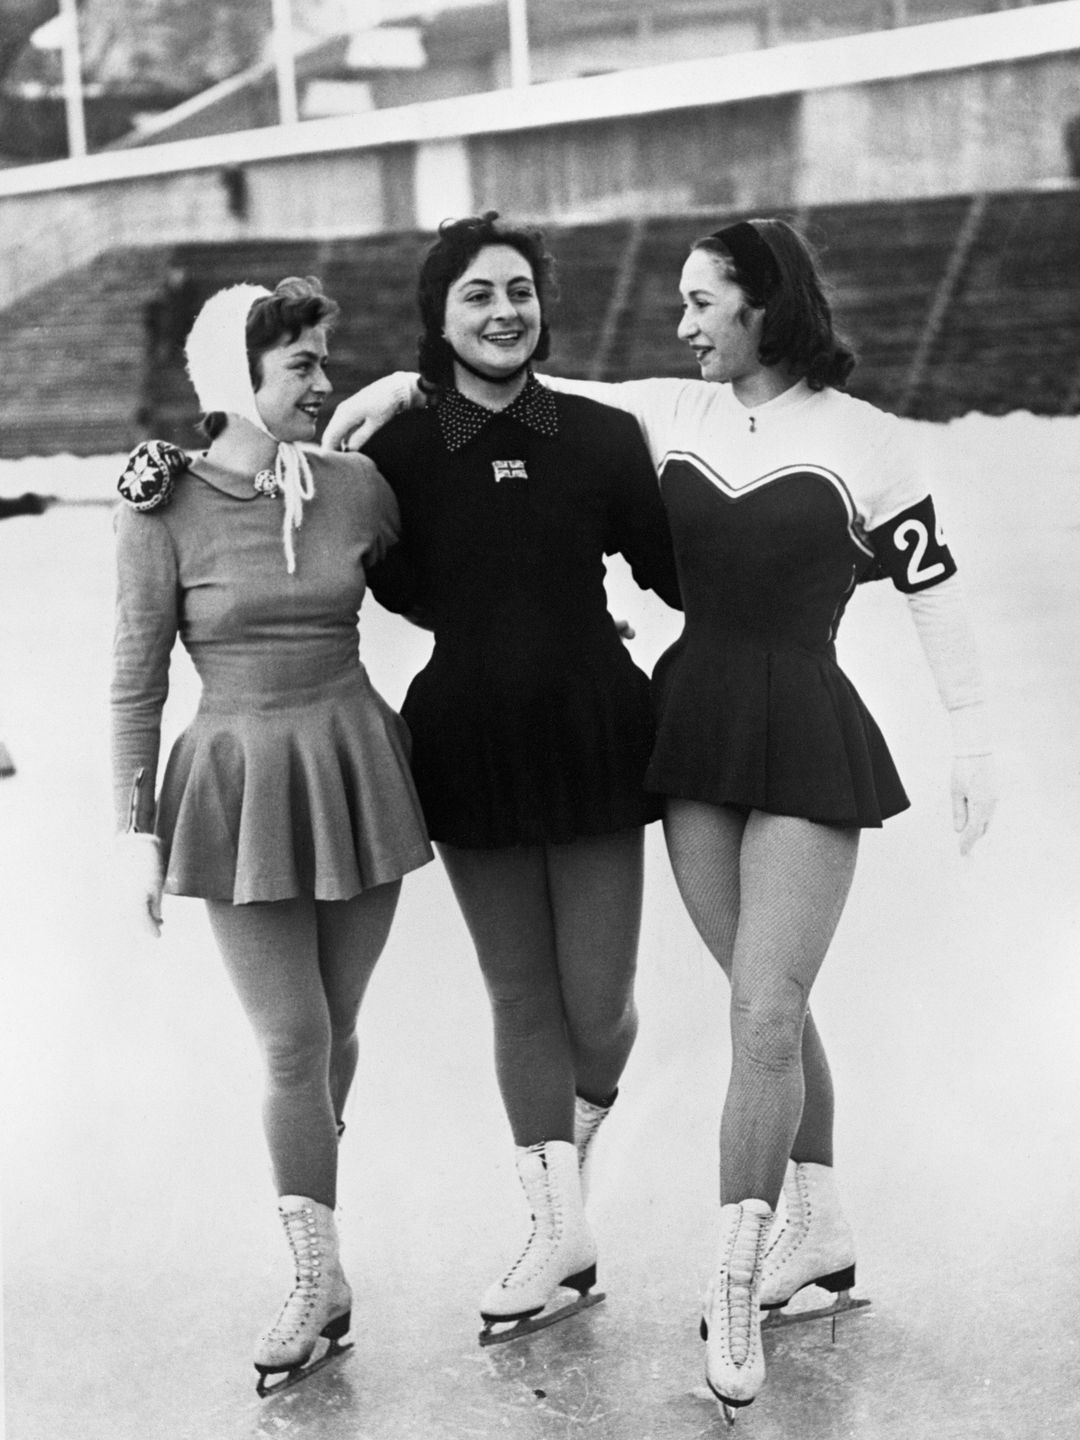 Erika Kraft of Germany, Jeannette Altwegg of Great Britain and Jaqueline du Bief of France at the 1952 Winter Games.